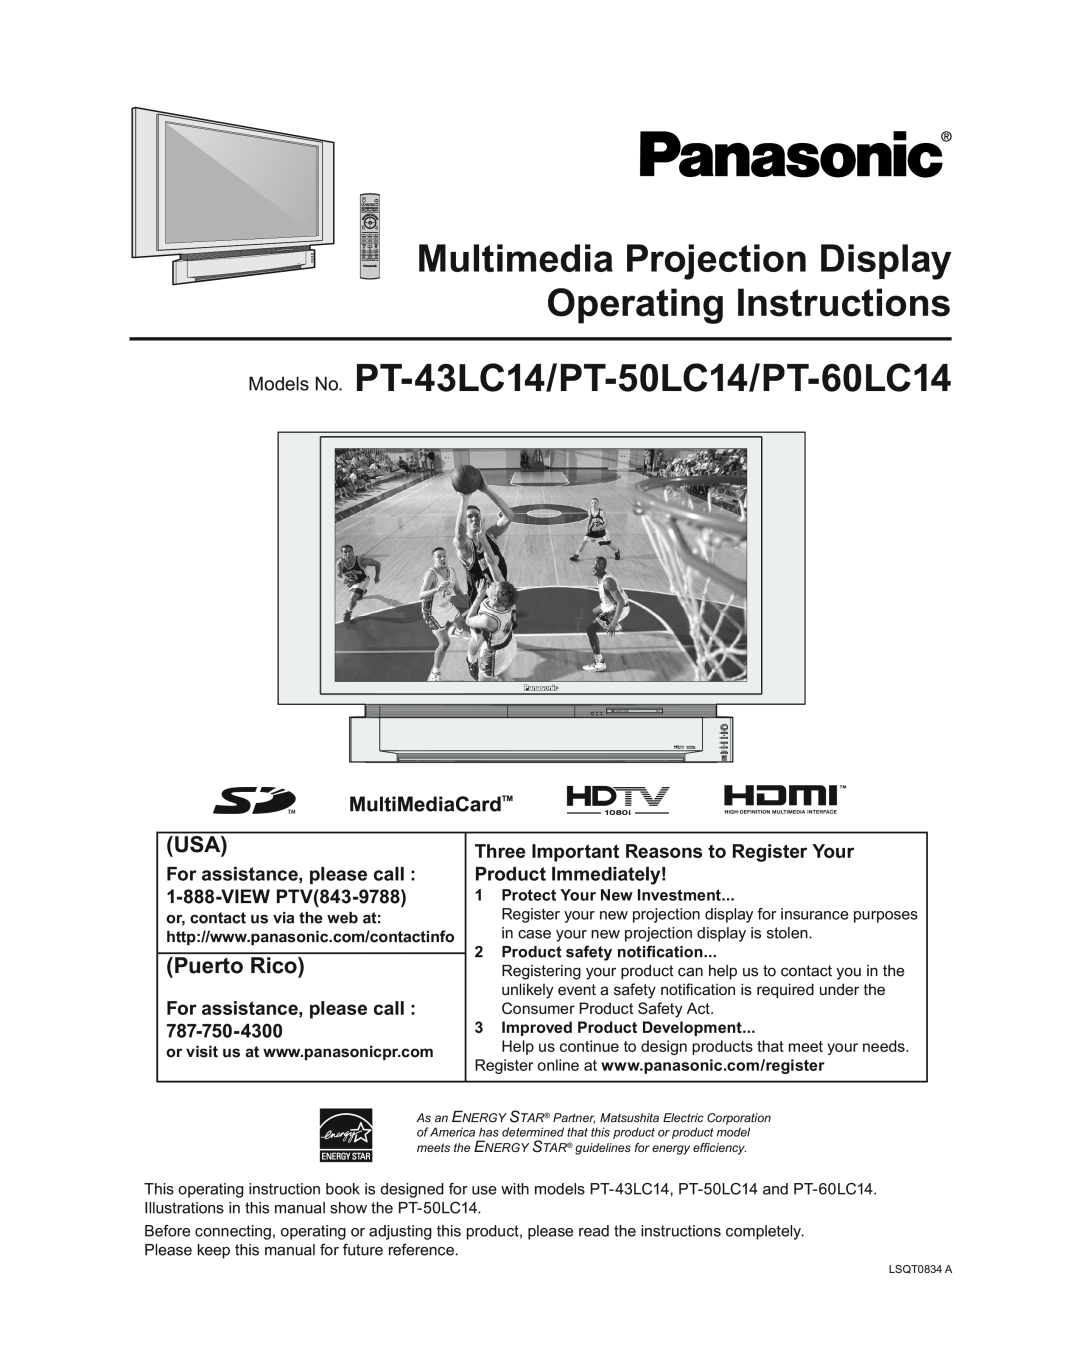 Panasonic PT-50LC14, PT-43LC14, PT-60LC14 manual Puerto Rico, Models No, For assistance, please call 1-888-VIEW PTV843-9788 